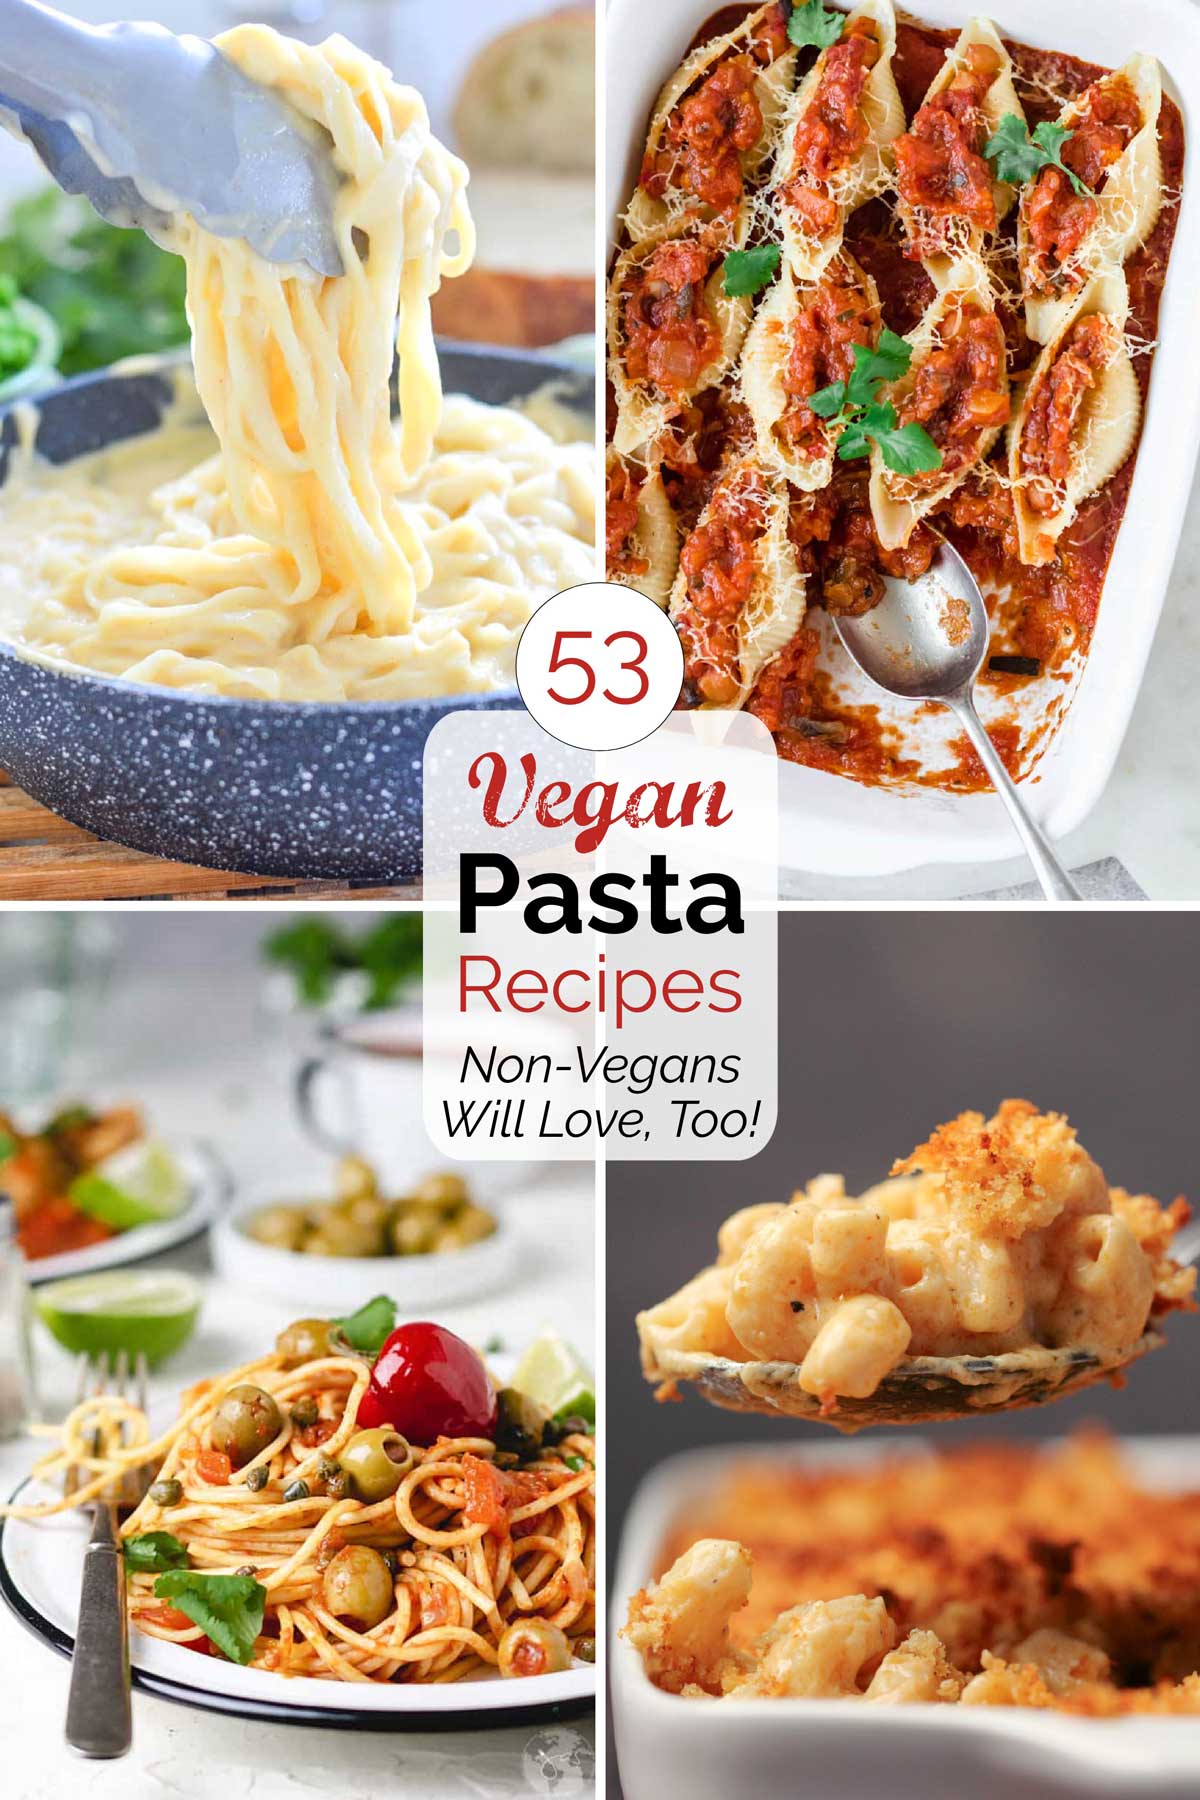 Collage of 4 recipe photos with centered text overlay reading "53 Vegan Pasta Recipes Non-Vegans Will Love, Too!".